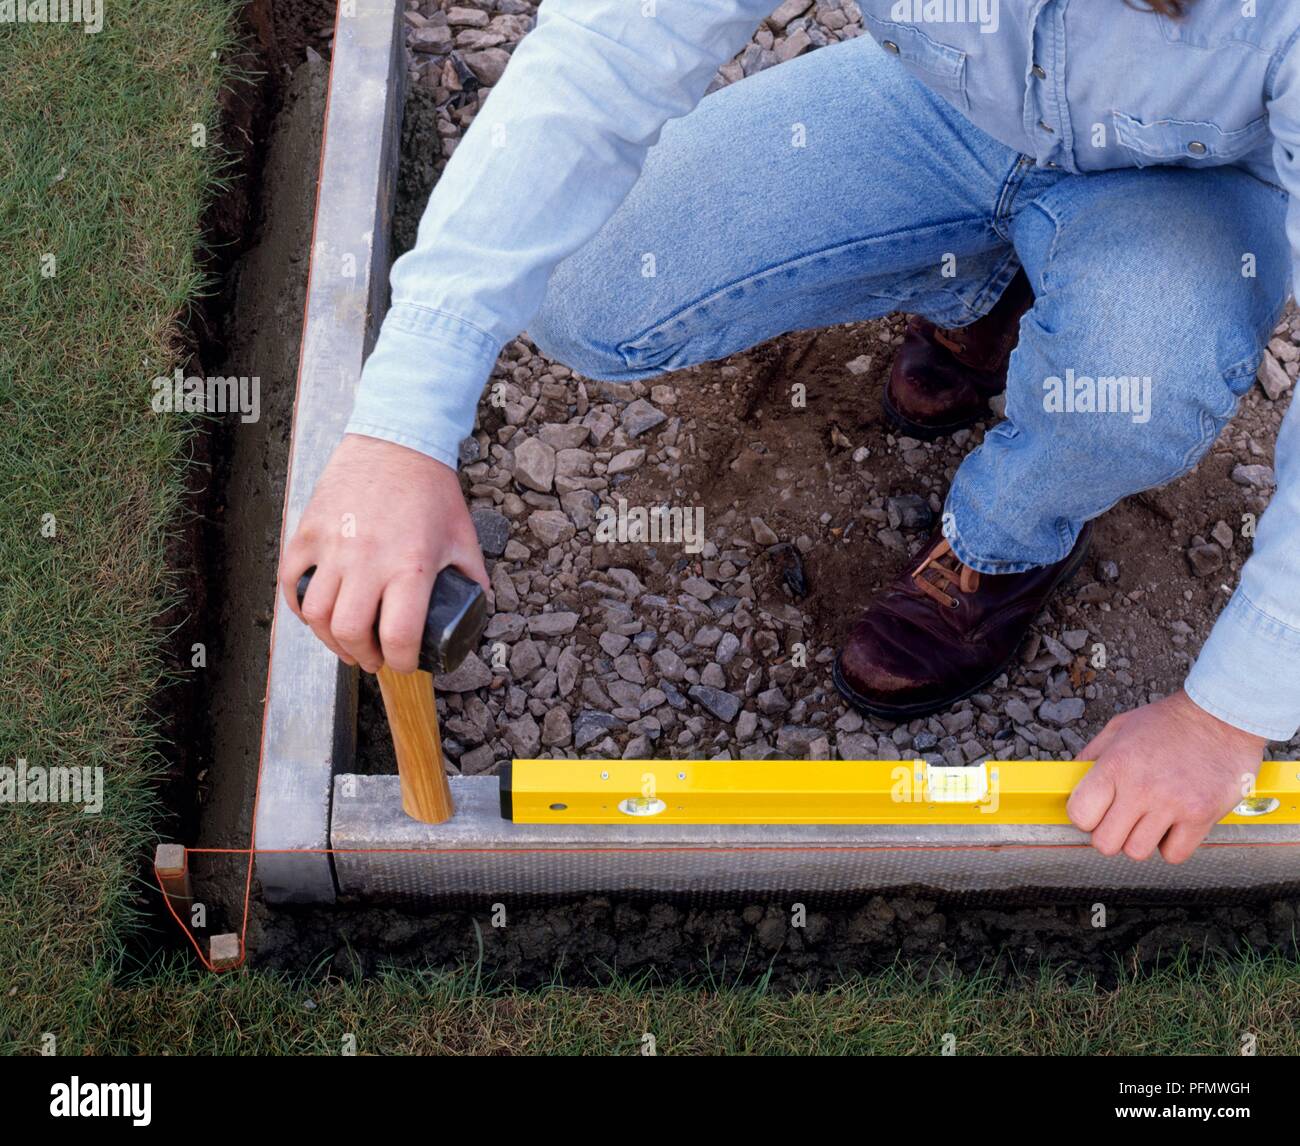 Laying a patio, using a spirit level and hammer to tap concrete edging level, close-up Stock Photo